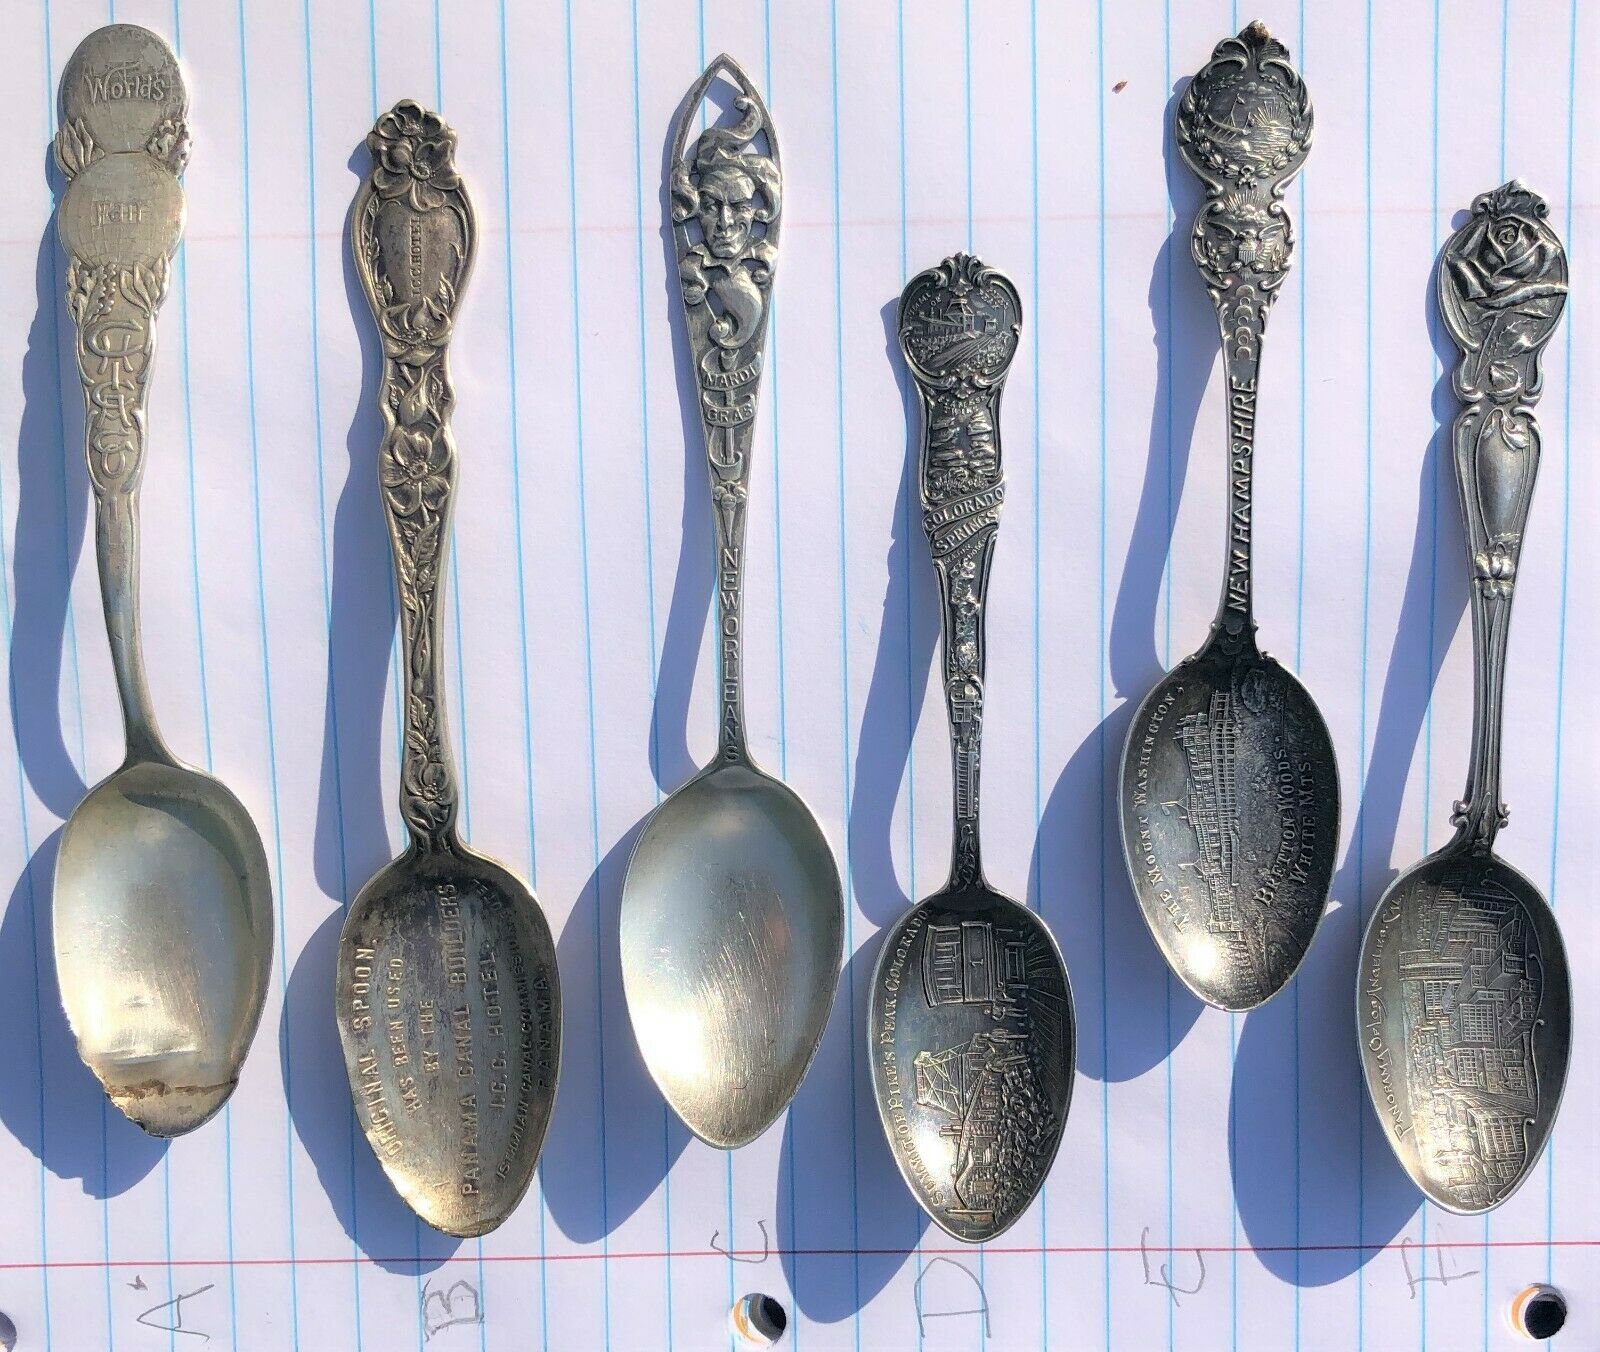 6 Vintage Commemorative Spoons, Sterling Silver, 1 Worlds Fair Chicago 1893